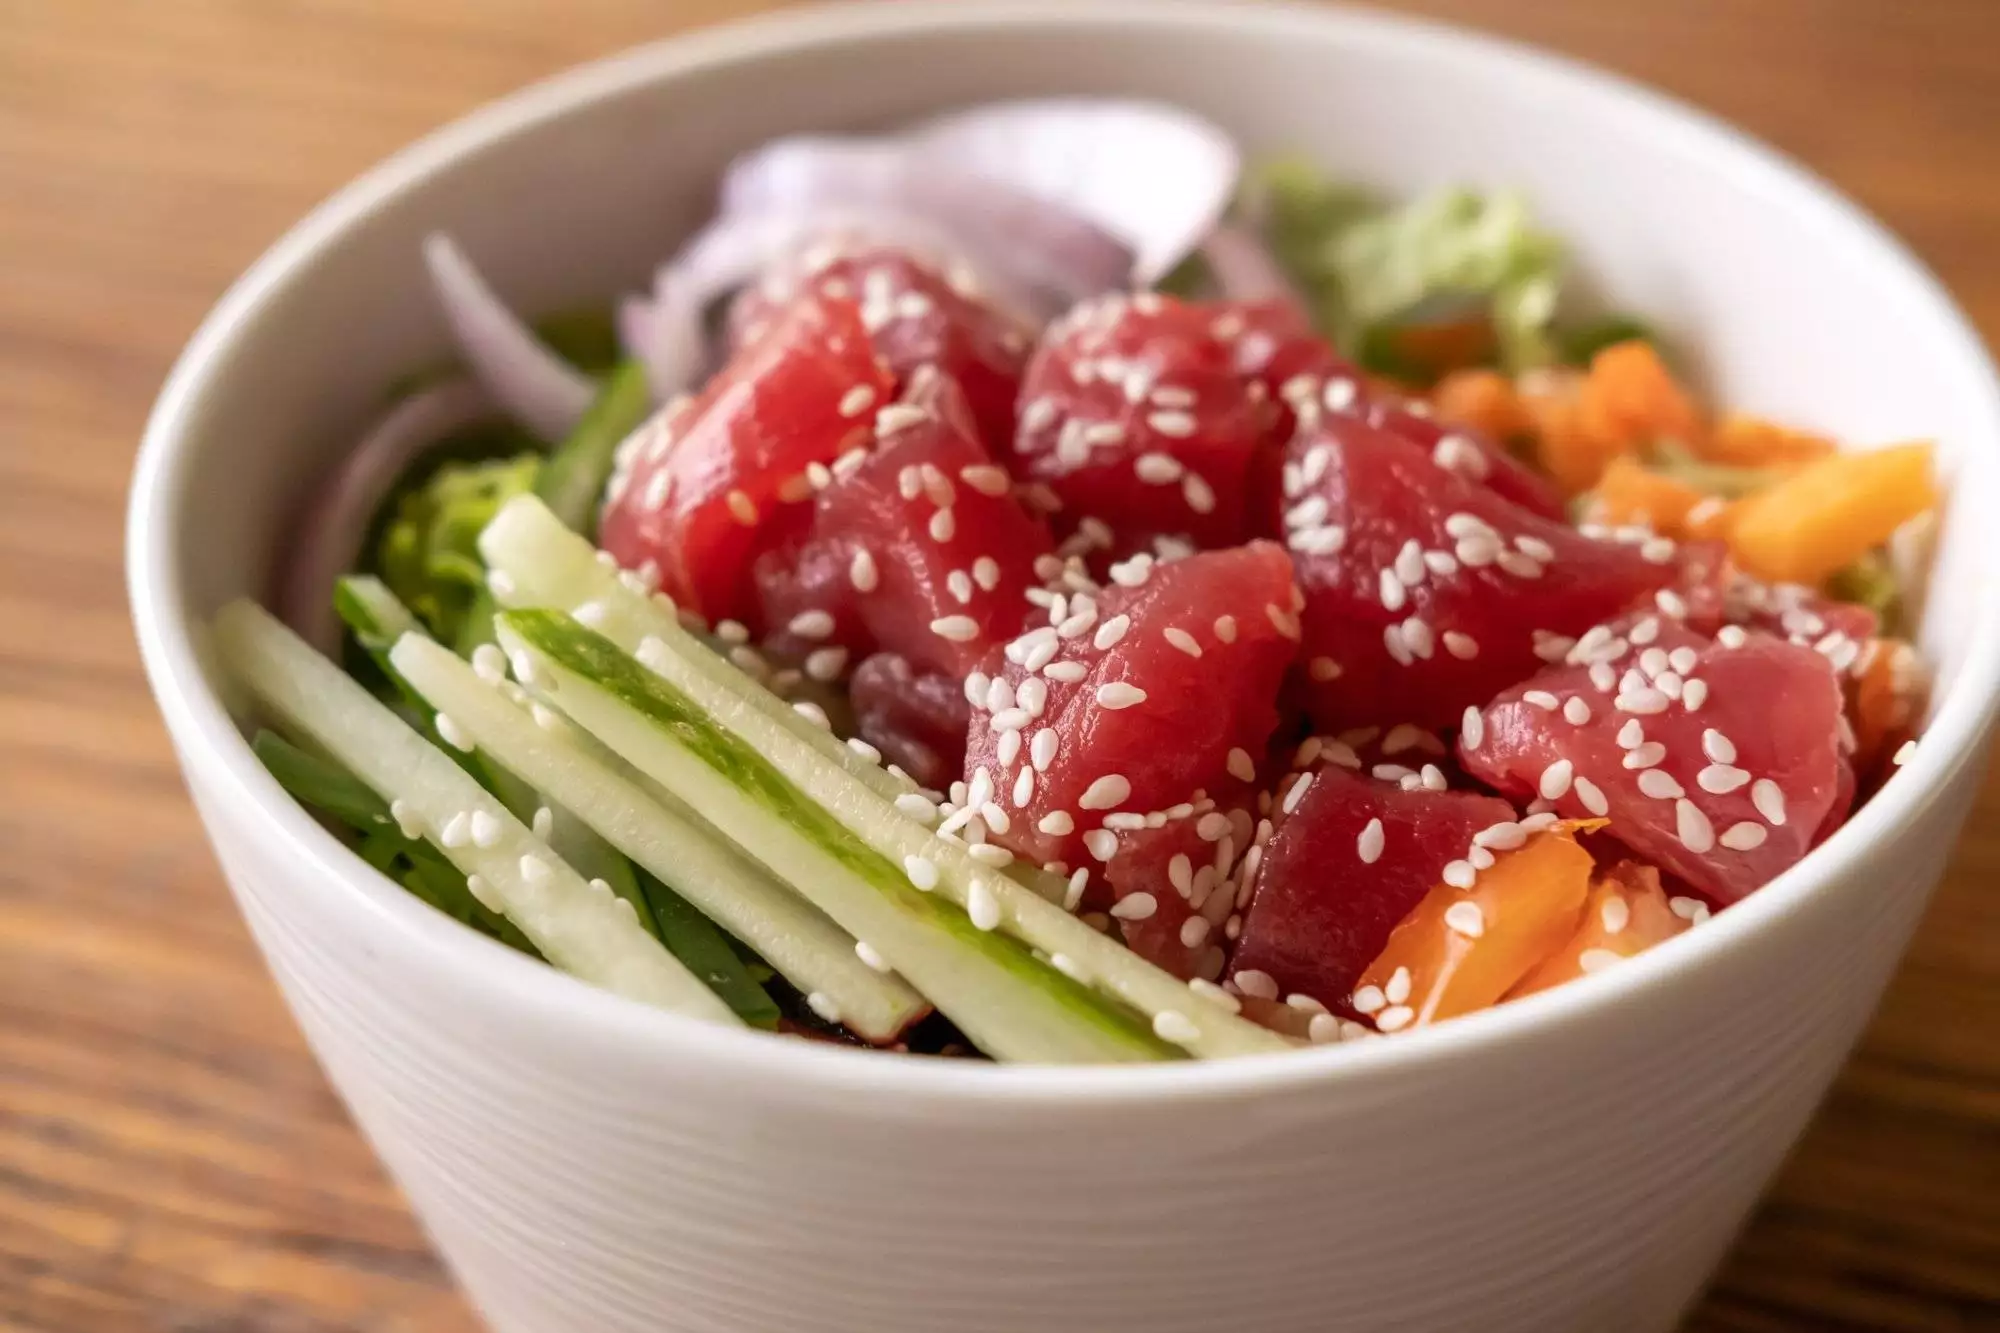 Healthy Eating Made Easy with Poke Bowls from PurePoke in Park Plaza